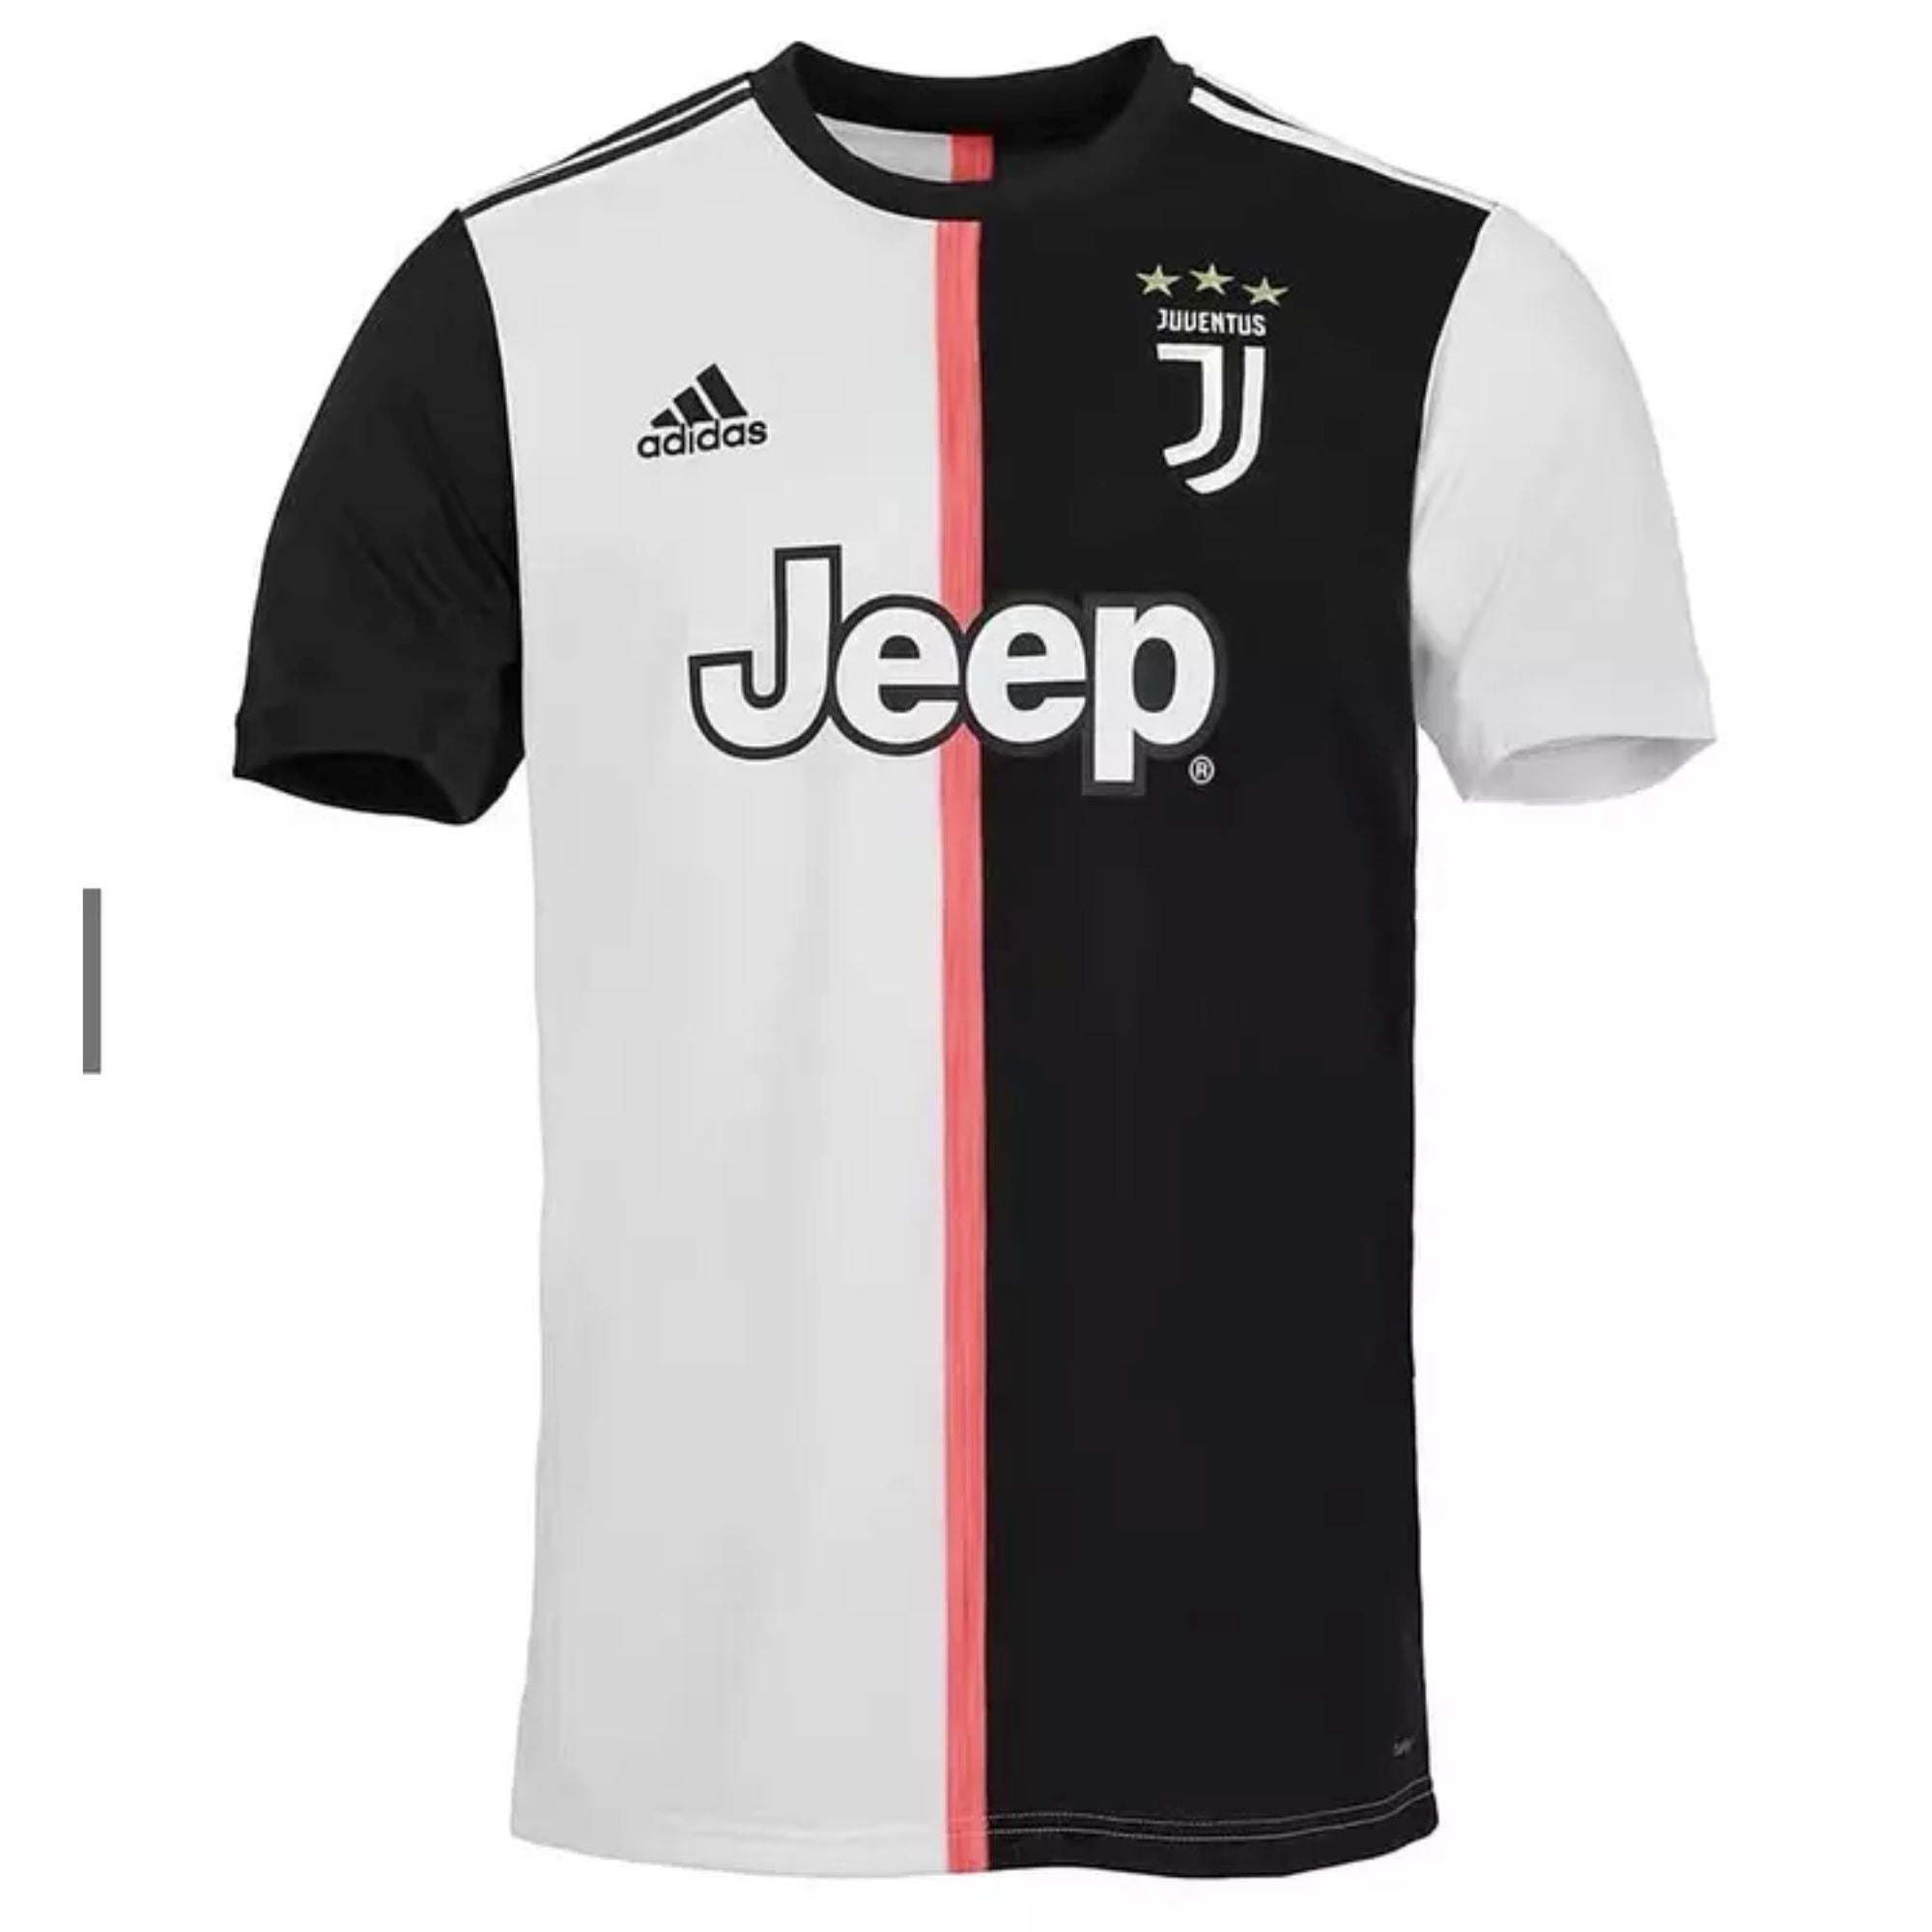 2019/20 Juventus Home Jersey with Scudetto - ITASPORT